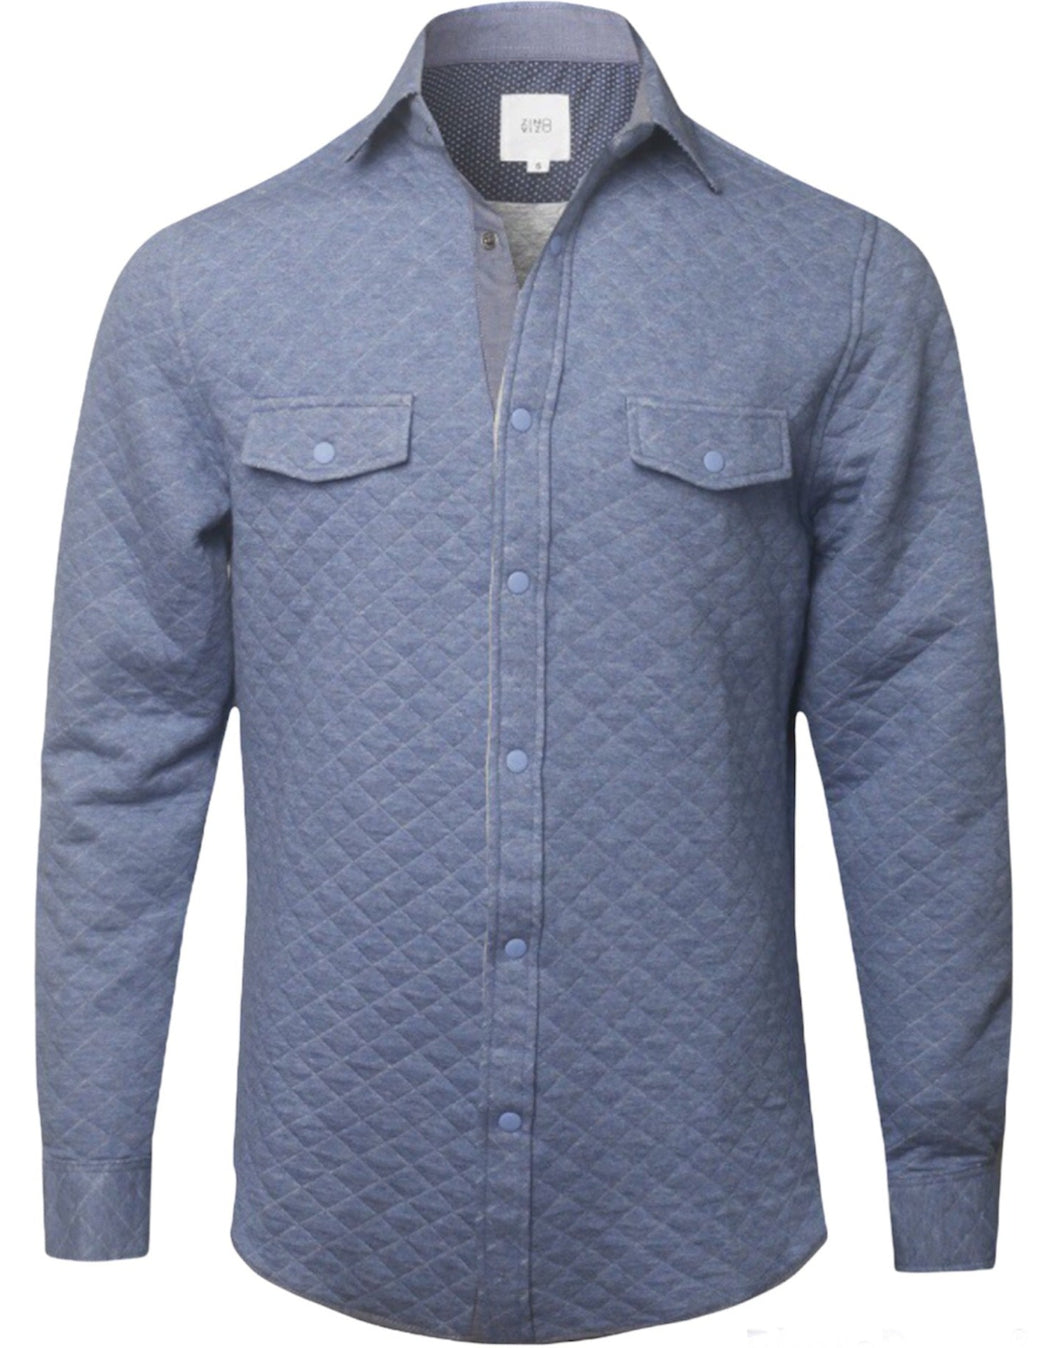 Super Soft Quilted Long Sleeve Snap Button Shirts- Blue